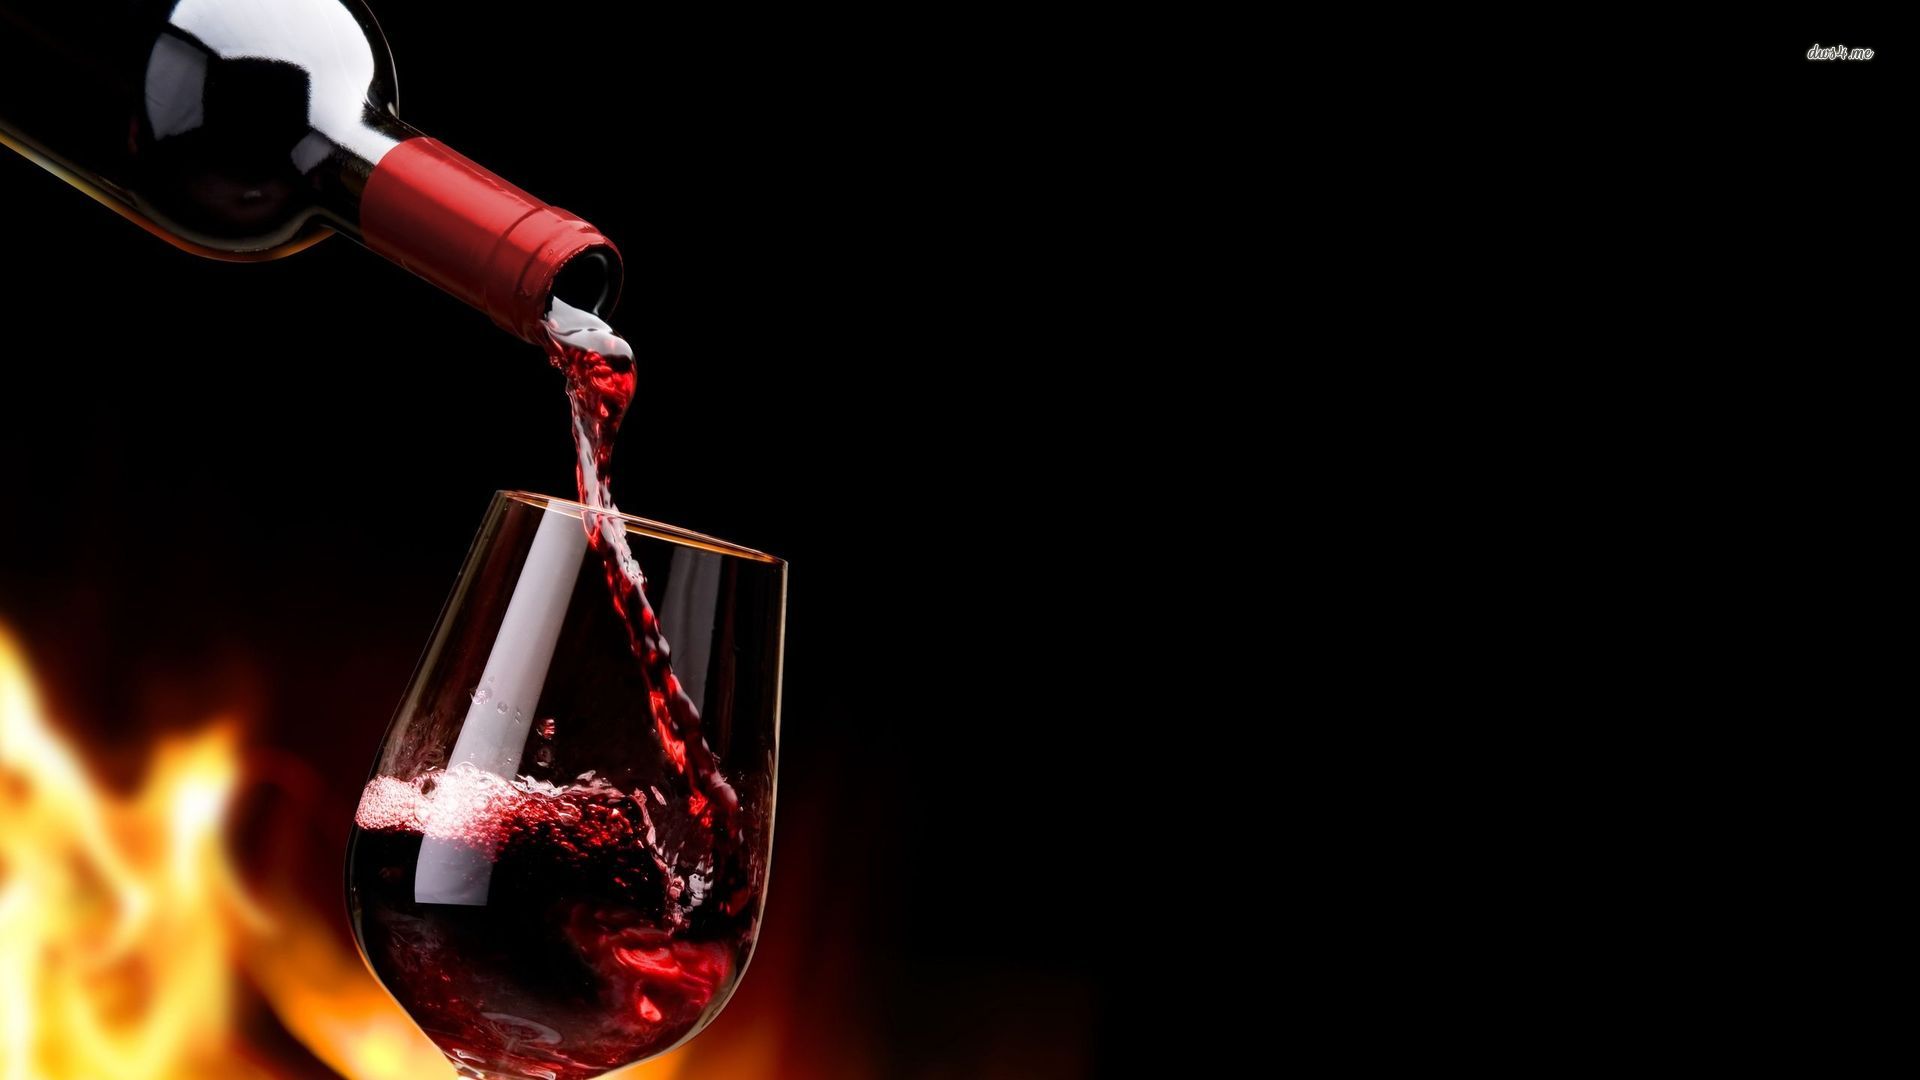 Red wine wallpaper   Photography wallpapers   19181 1920x1080